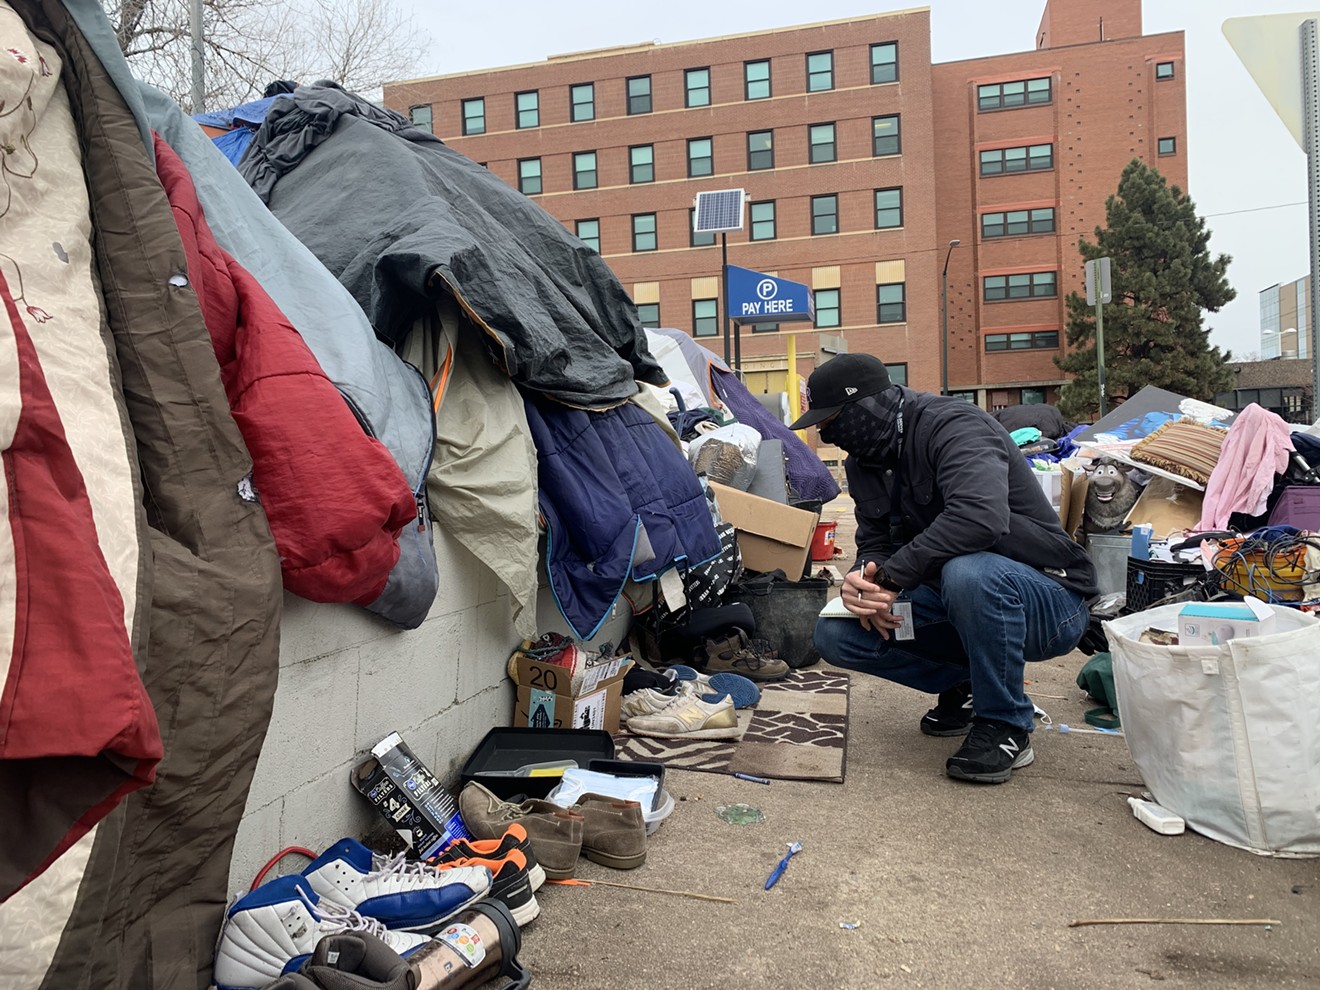 Scott Lawson visits small encampments and tries to get people living there connected with services.